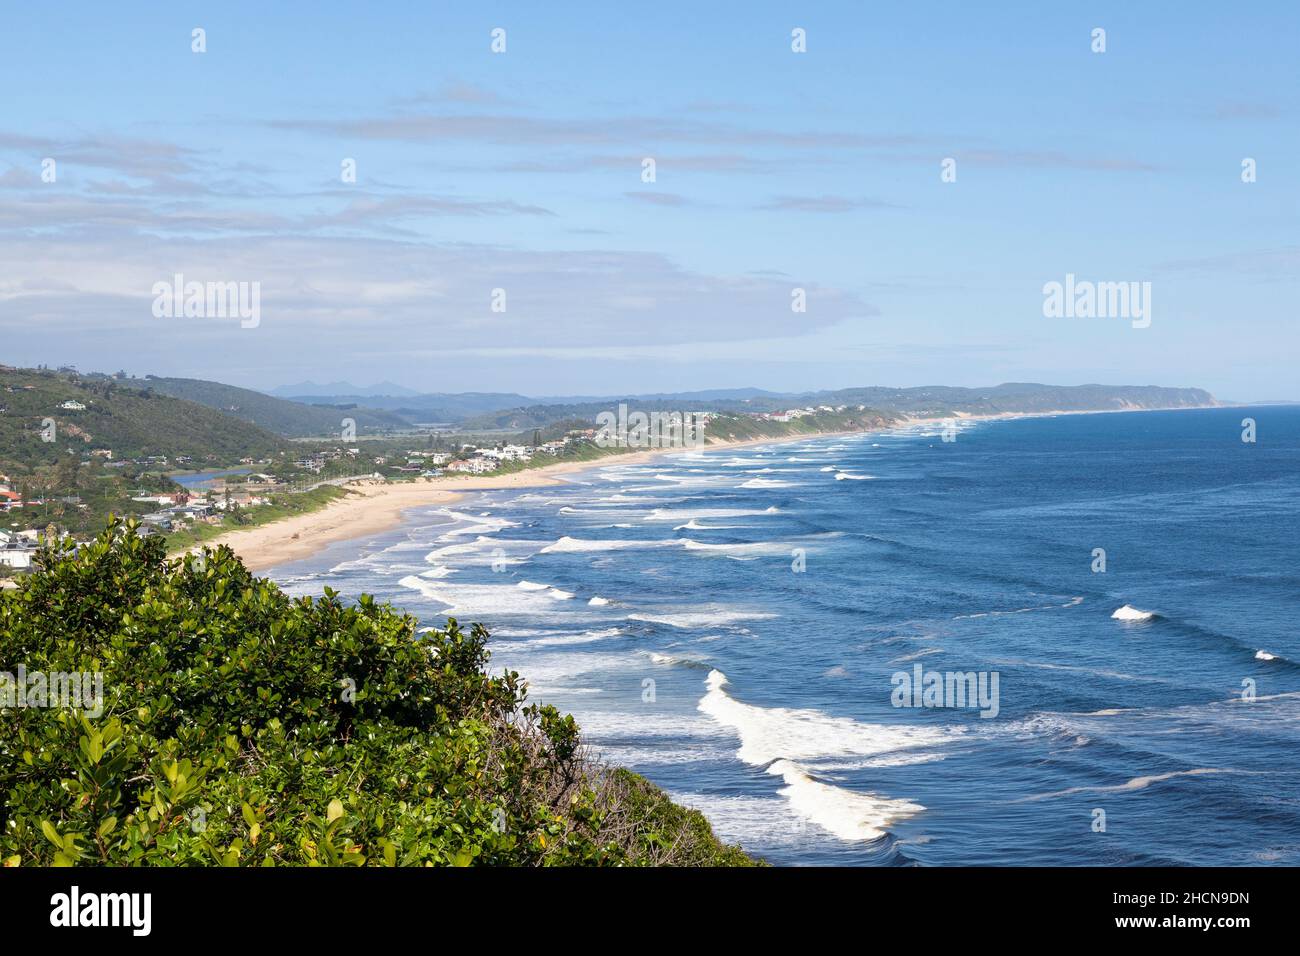 Wilderness from the lookout, Garden Route, Western Cape, South Africa with a view along the miles of sandy beach, montane forests and lake district Stock Photo